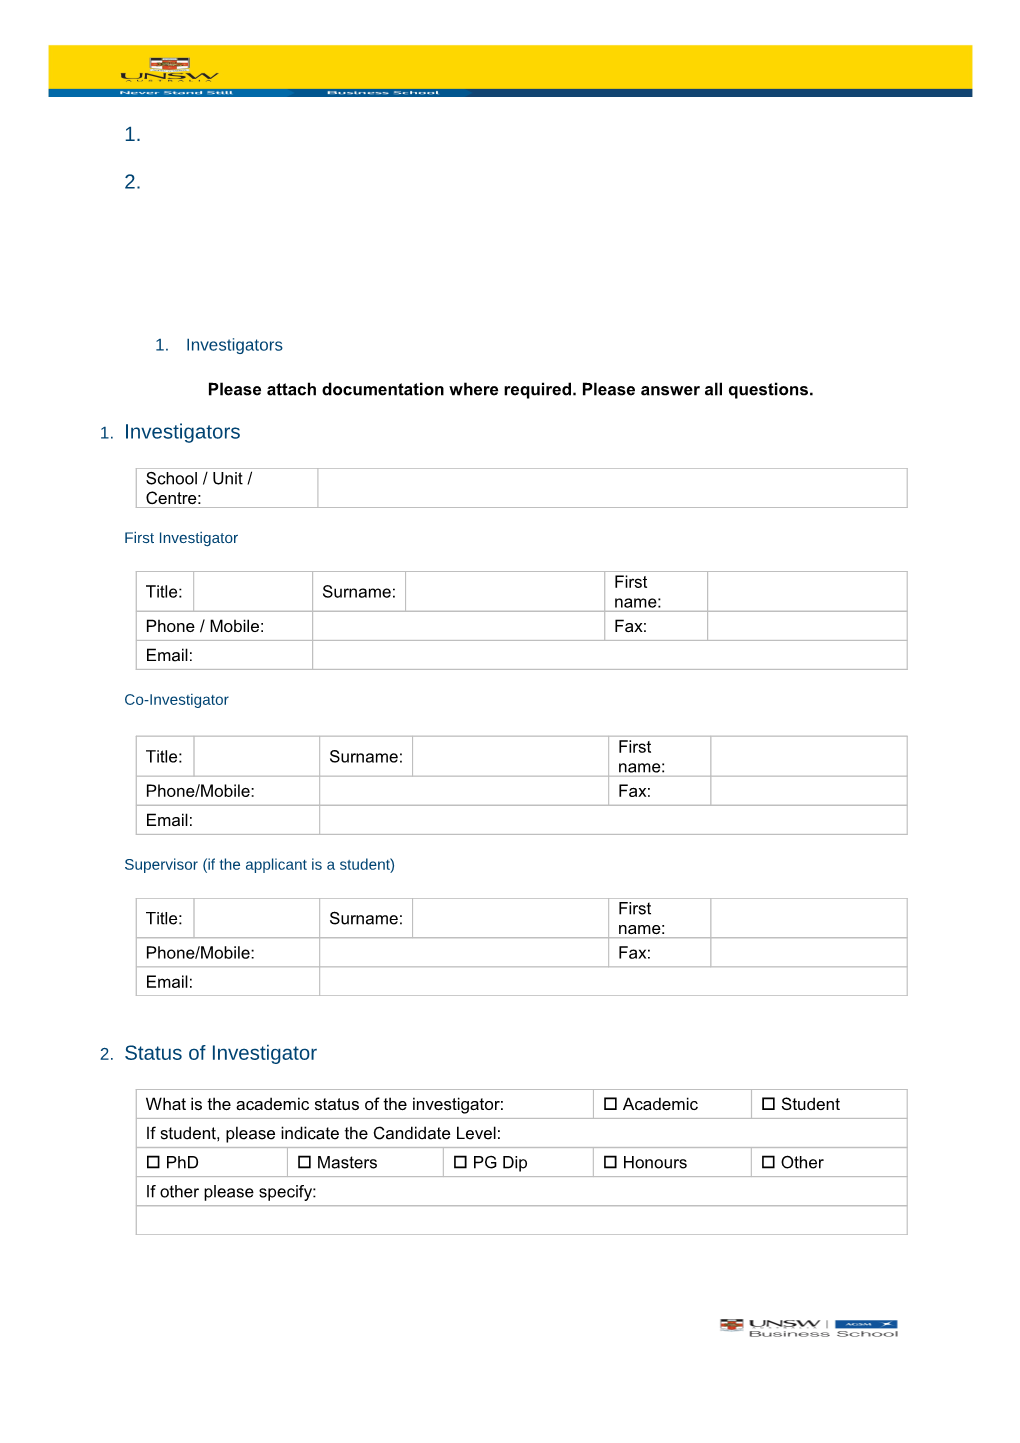 Human Research Ethics Application Form